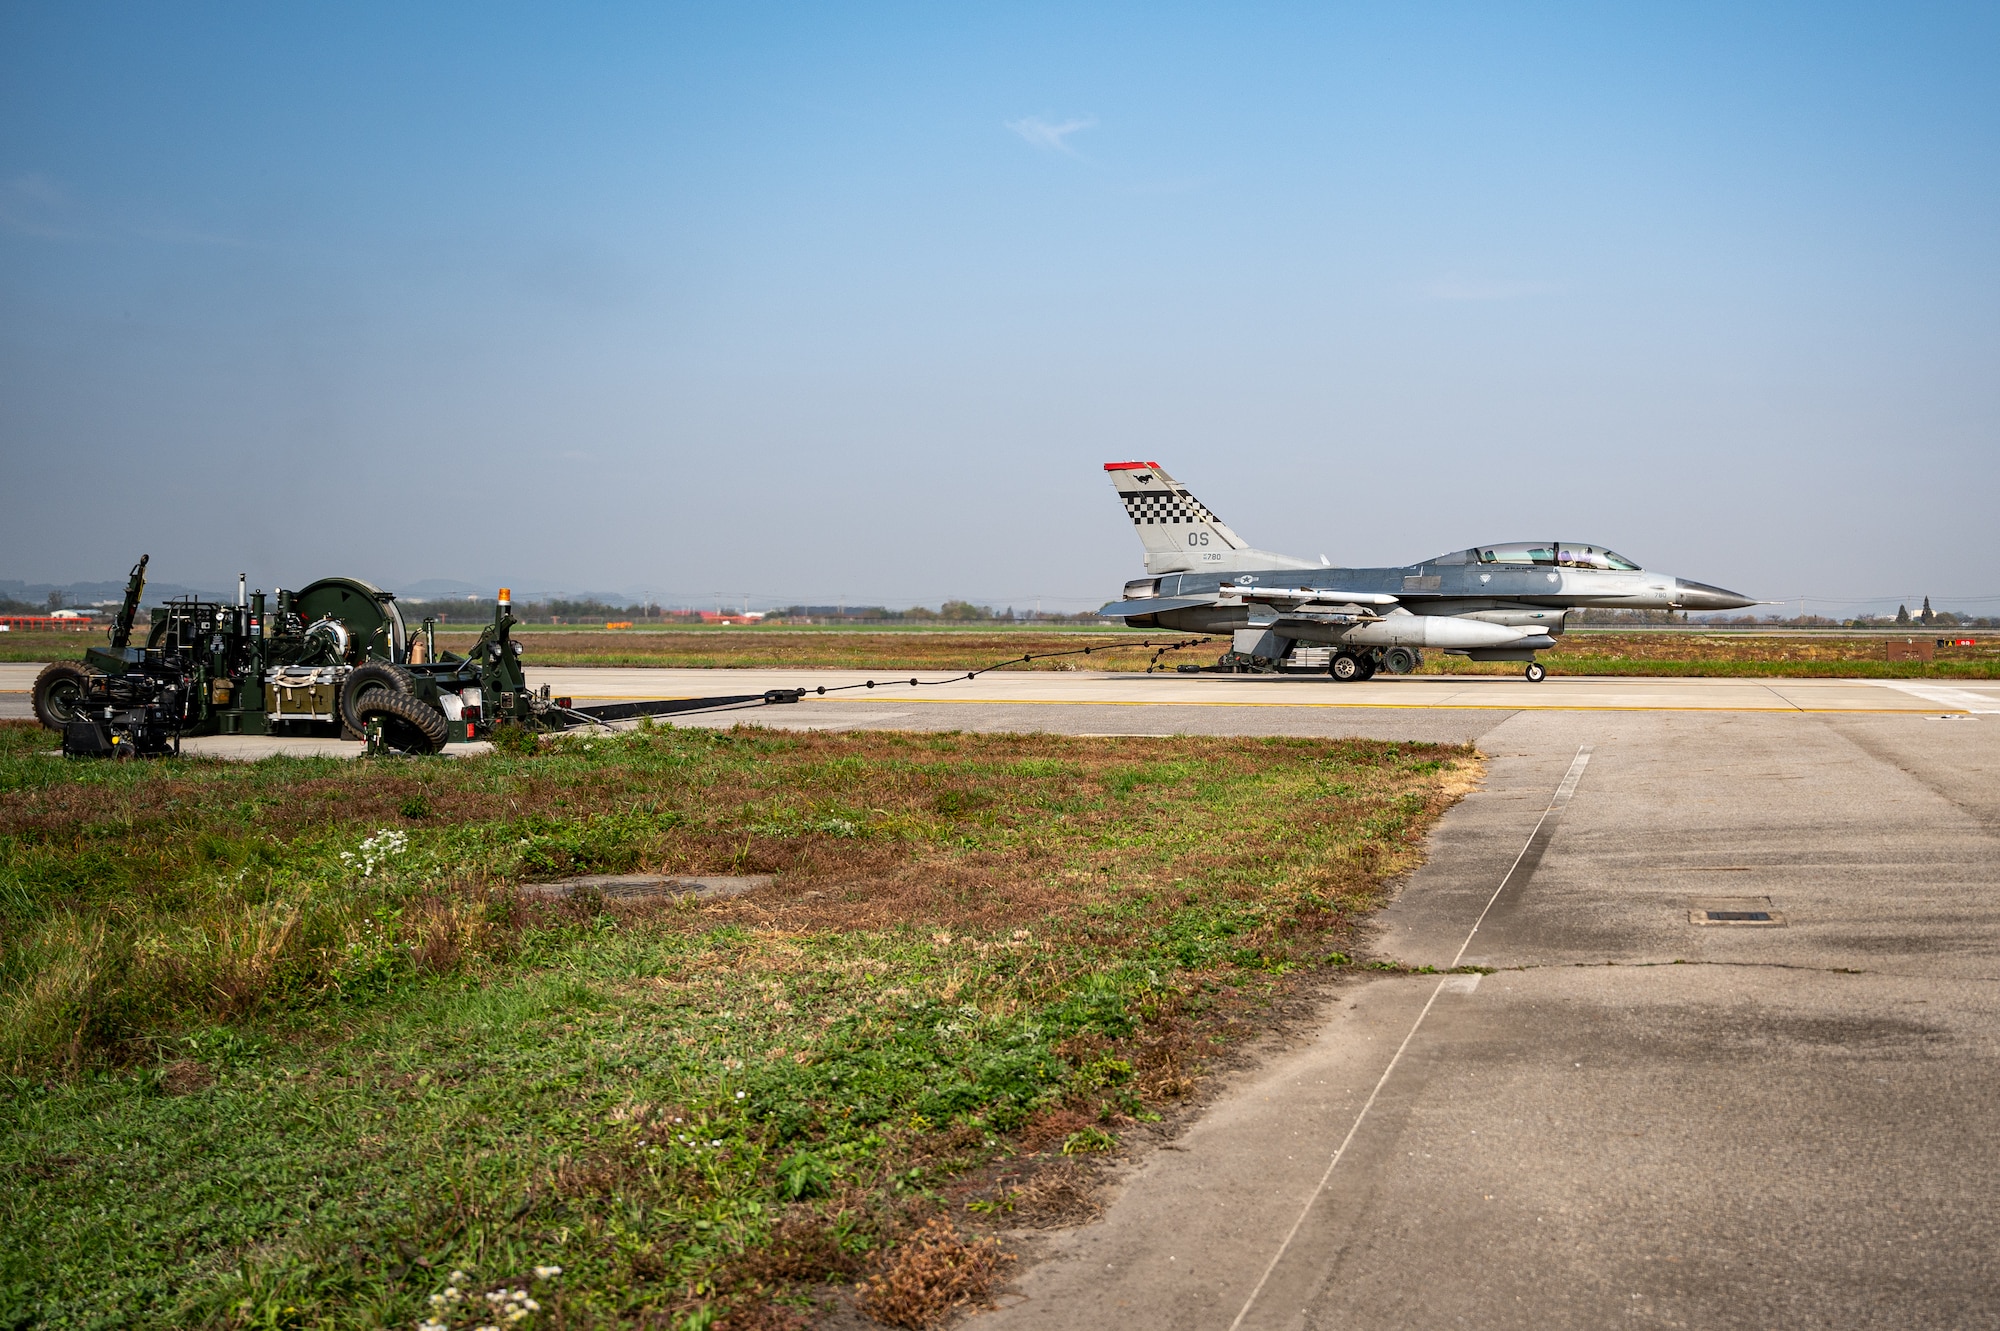 A U.S. Air Force F-16 Fighting Falcon stops on an alternate landing strip using a Mobile Aircraft Arresting System during Vigilant Defense 24 at Osan Air Base, Republic of Korea, Oct. 30, 2023. In contingency environments, the ALS is activated when the main runway sustains heavy damage, which allows pilots to maintain readiness and continue flying operations. VD24 is a routine training event that tests the military capabilities across the peninsula, allowing combined and joint training at both the operational and tactical levels. Training is conducted throughout the year to generate combat airpower at a moment’s notice, affirming the commitment to the ROK remains ironclad and ensures regional stability throughout the Indo-Pacific. (U.S. Air Force photo by Staff Sgt. Thomas Sjoberg)